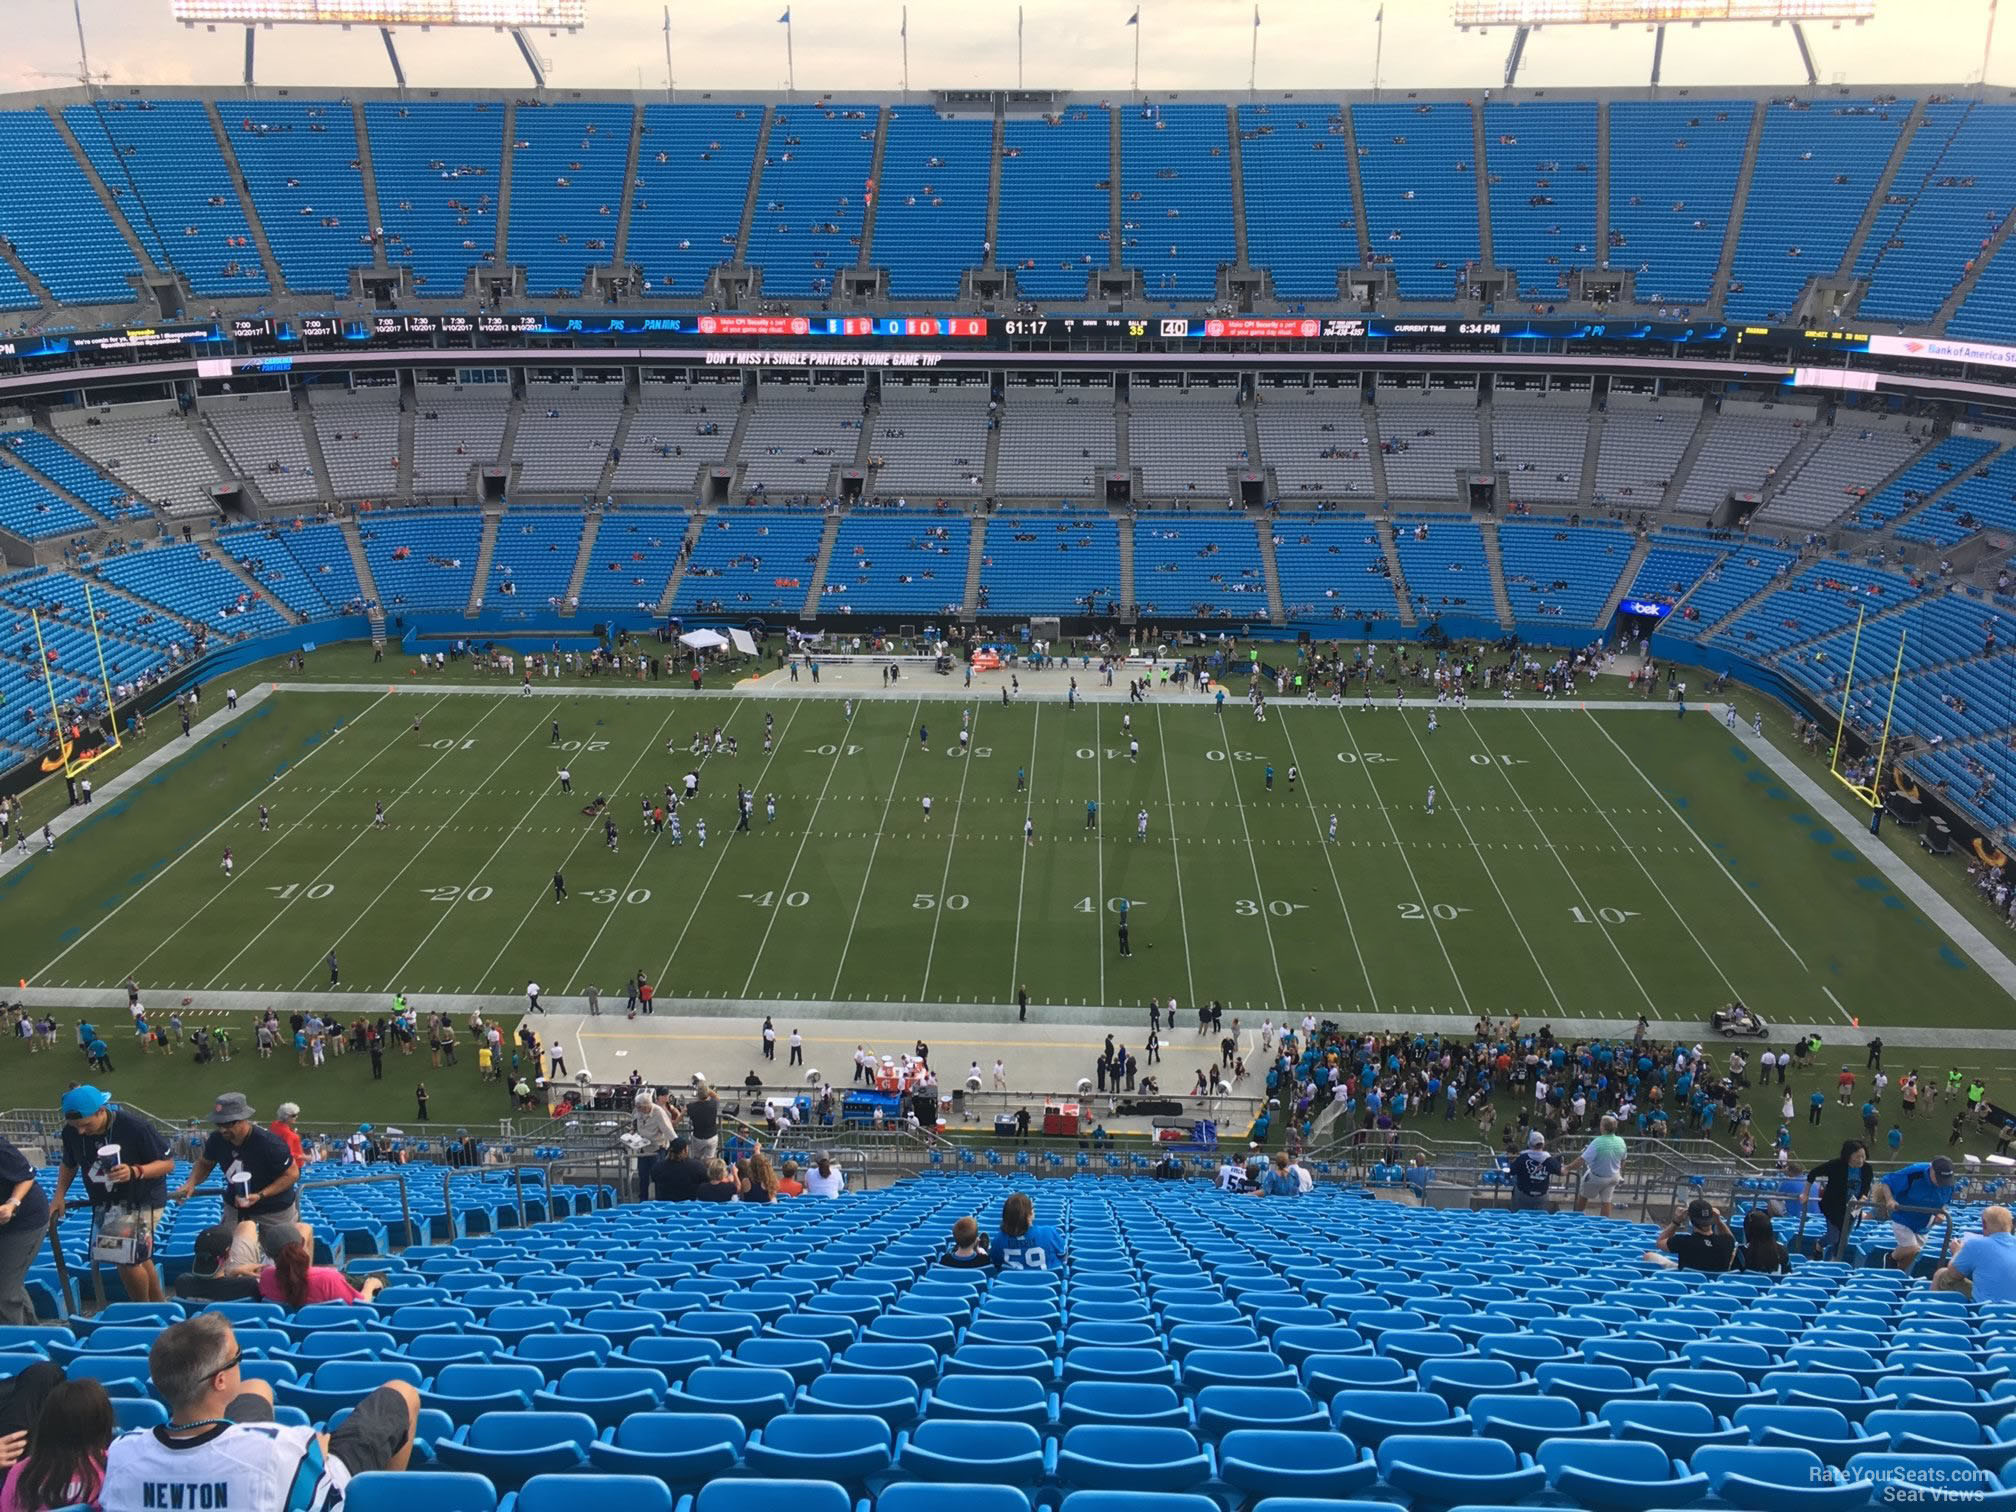 Section 514 At Bank Of America Stadium